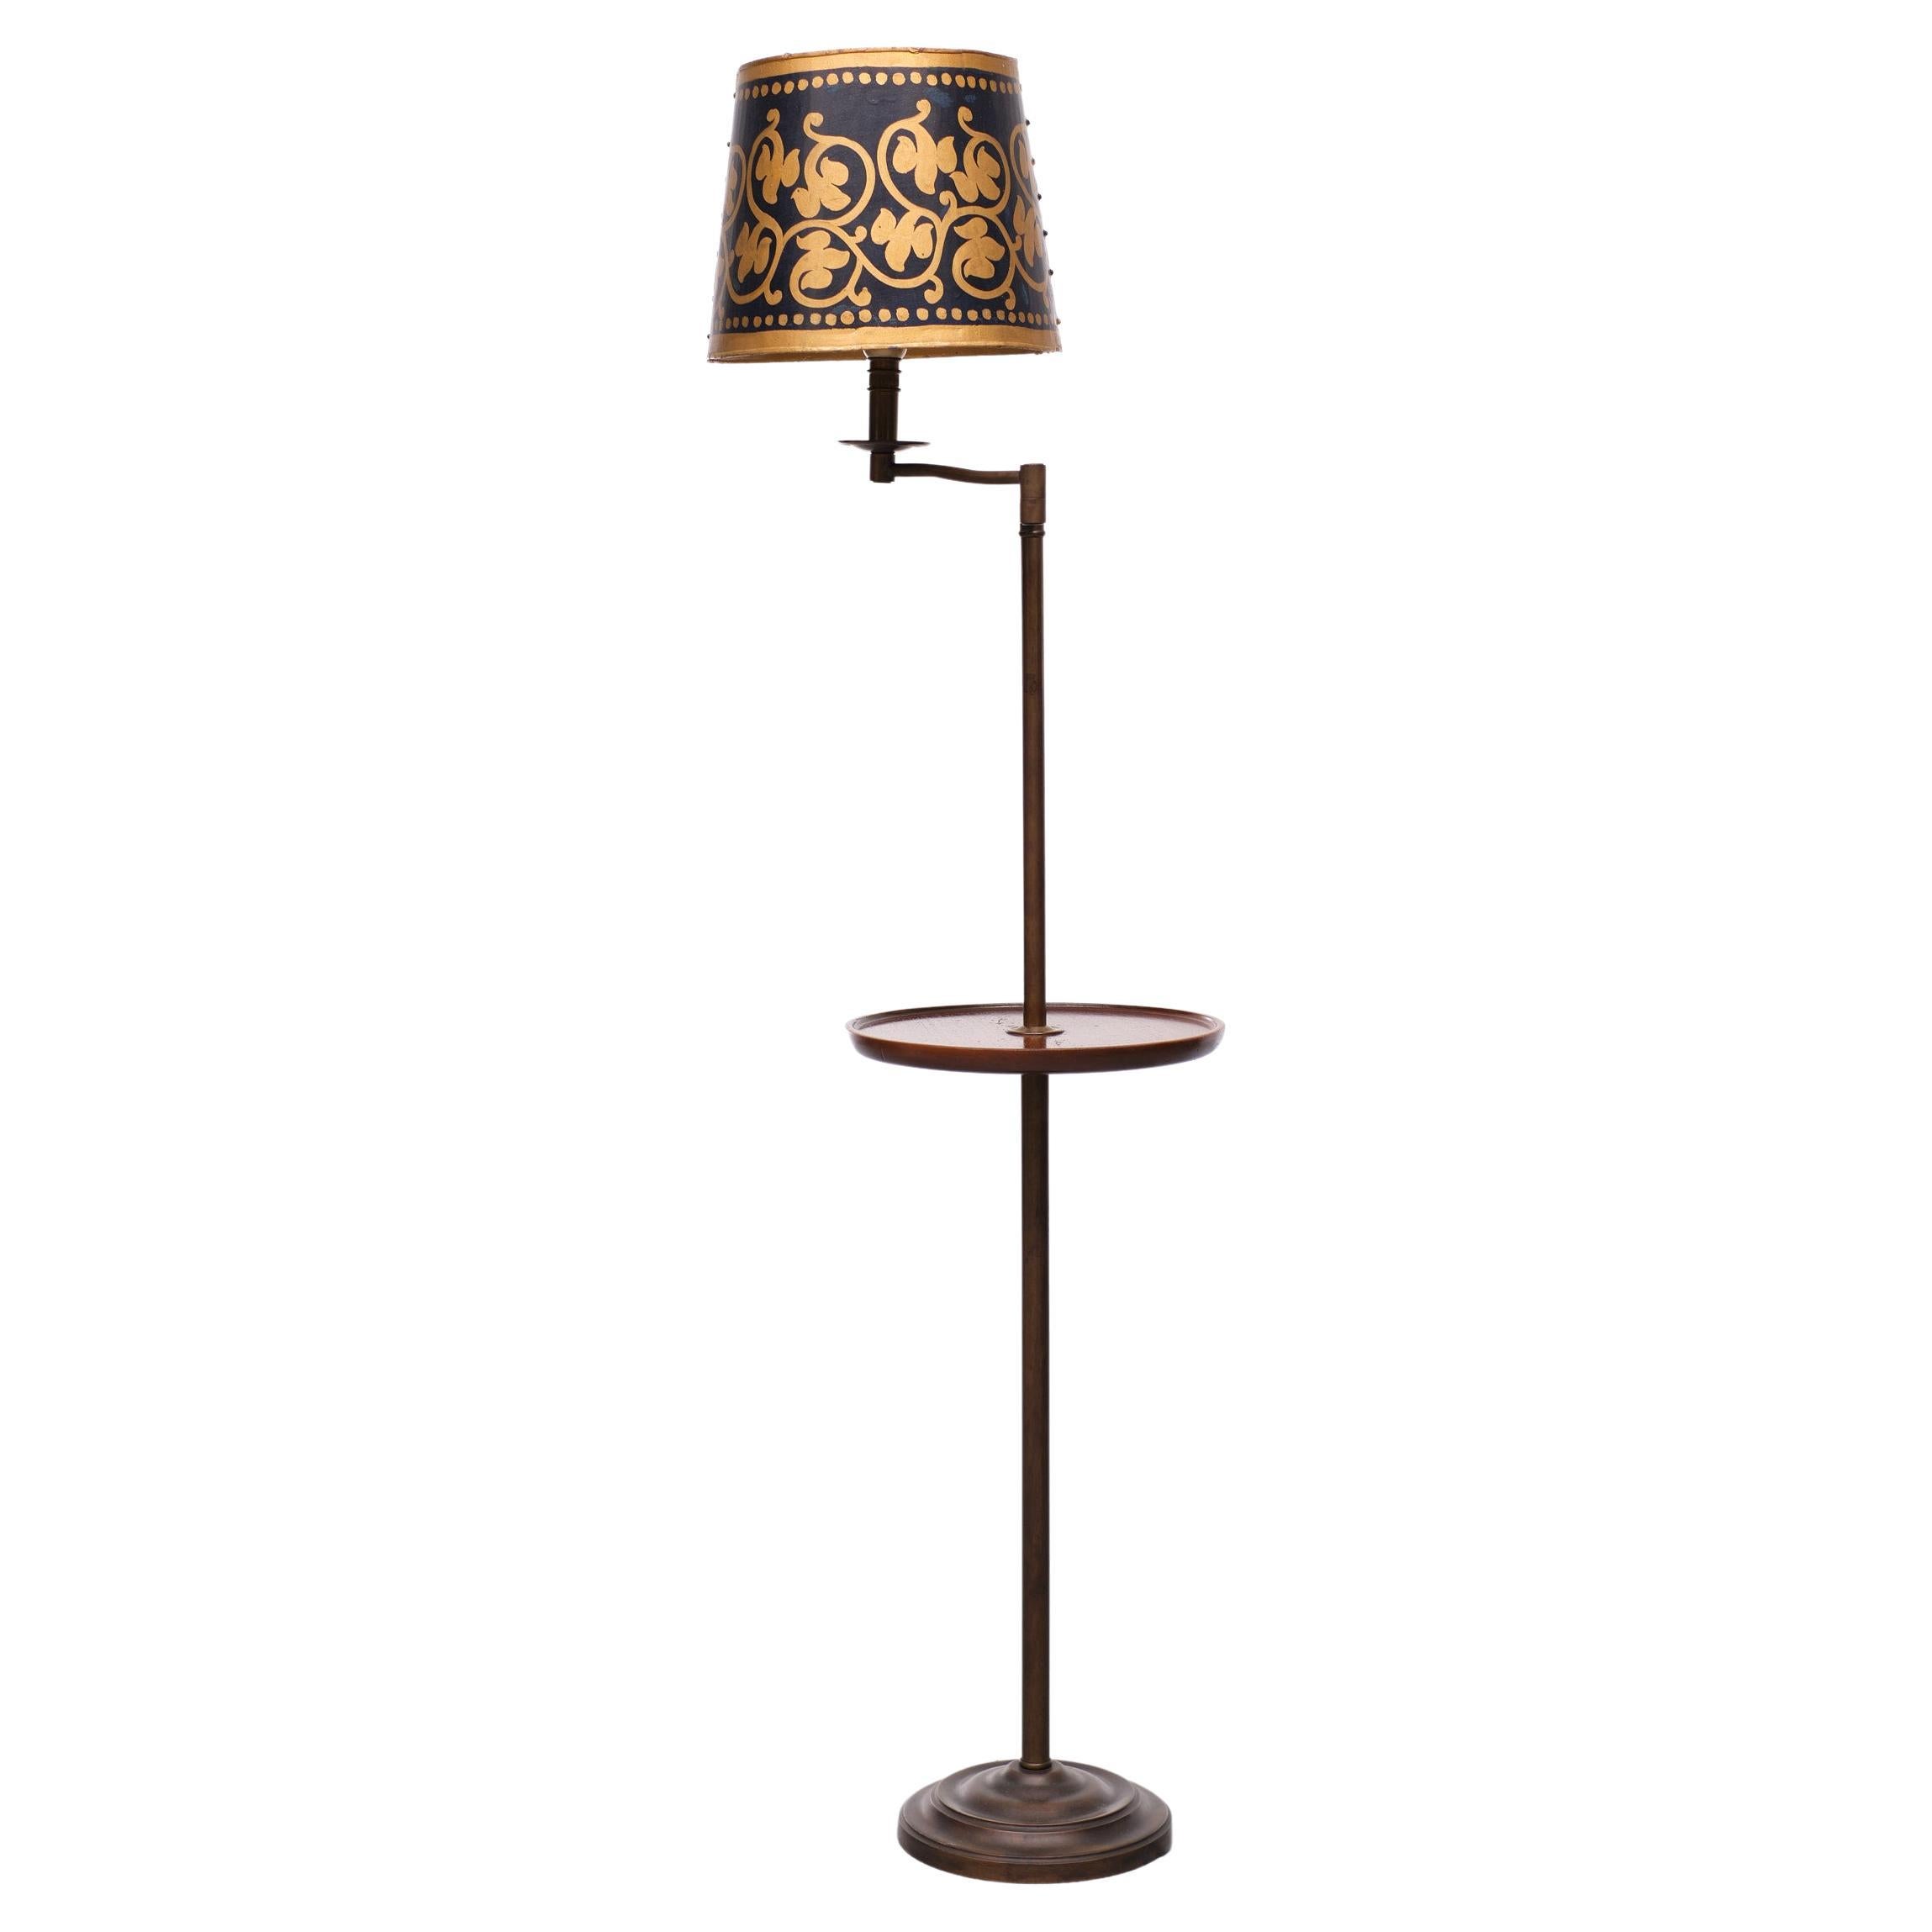 Love this swing arm floor lamp. Antique brass upright, with solid mahogany table. 
Comes with a unique Handmade Iron shade. Hand painted classic floral patron. 
In a dark blue and gold color. One large E27 bulb needed. Floor power switch.
 